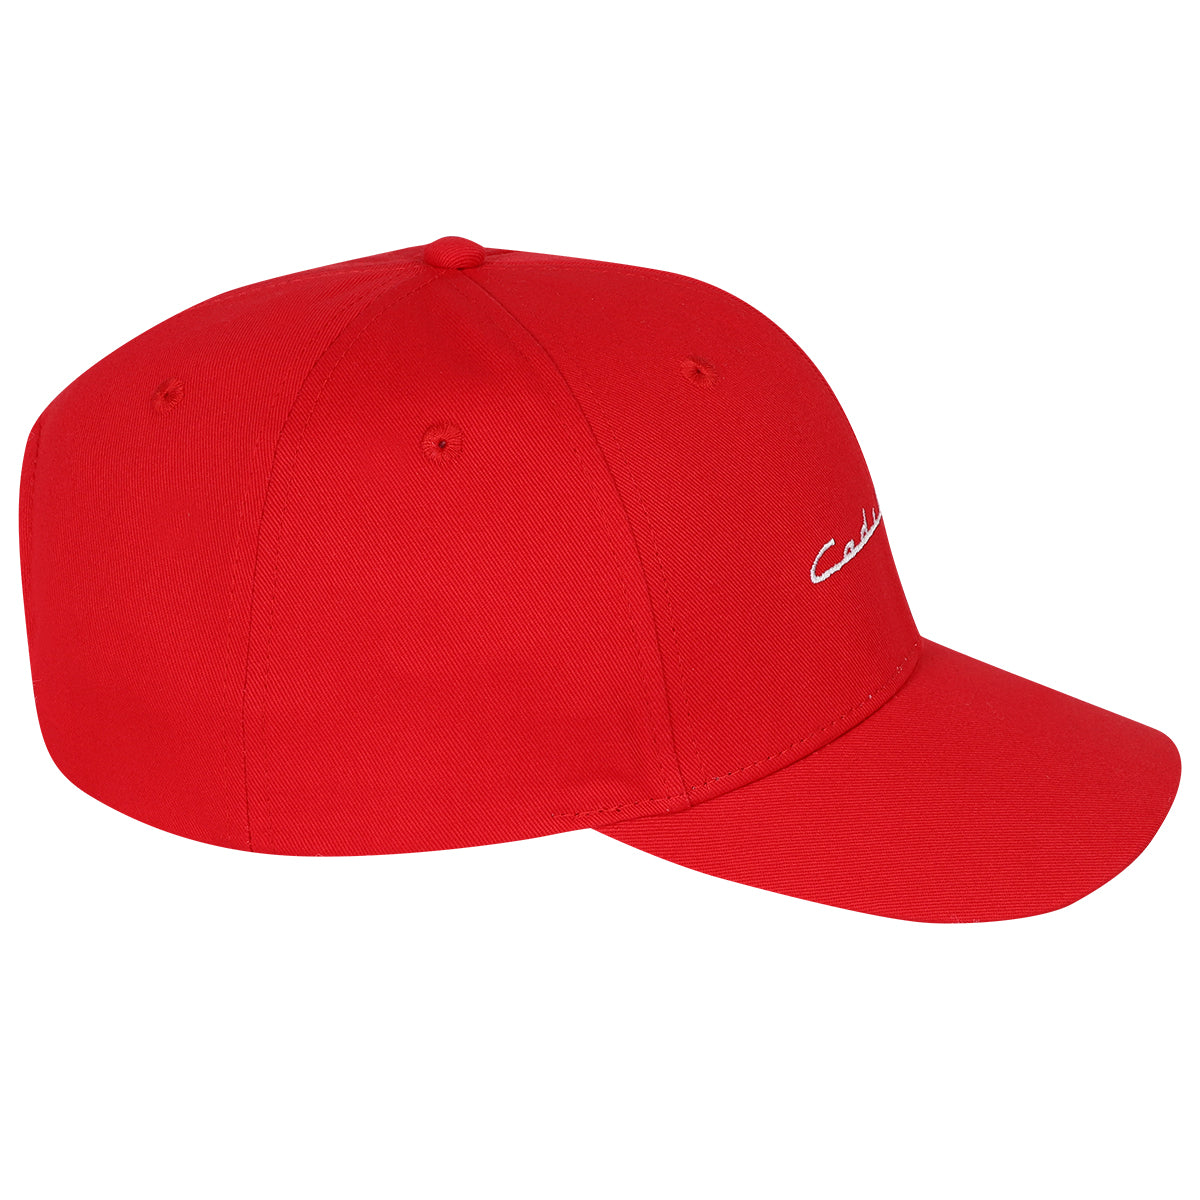 Cadillac Heritage Red Hat